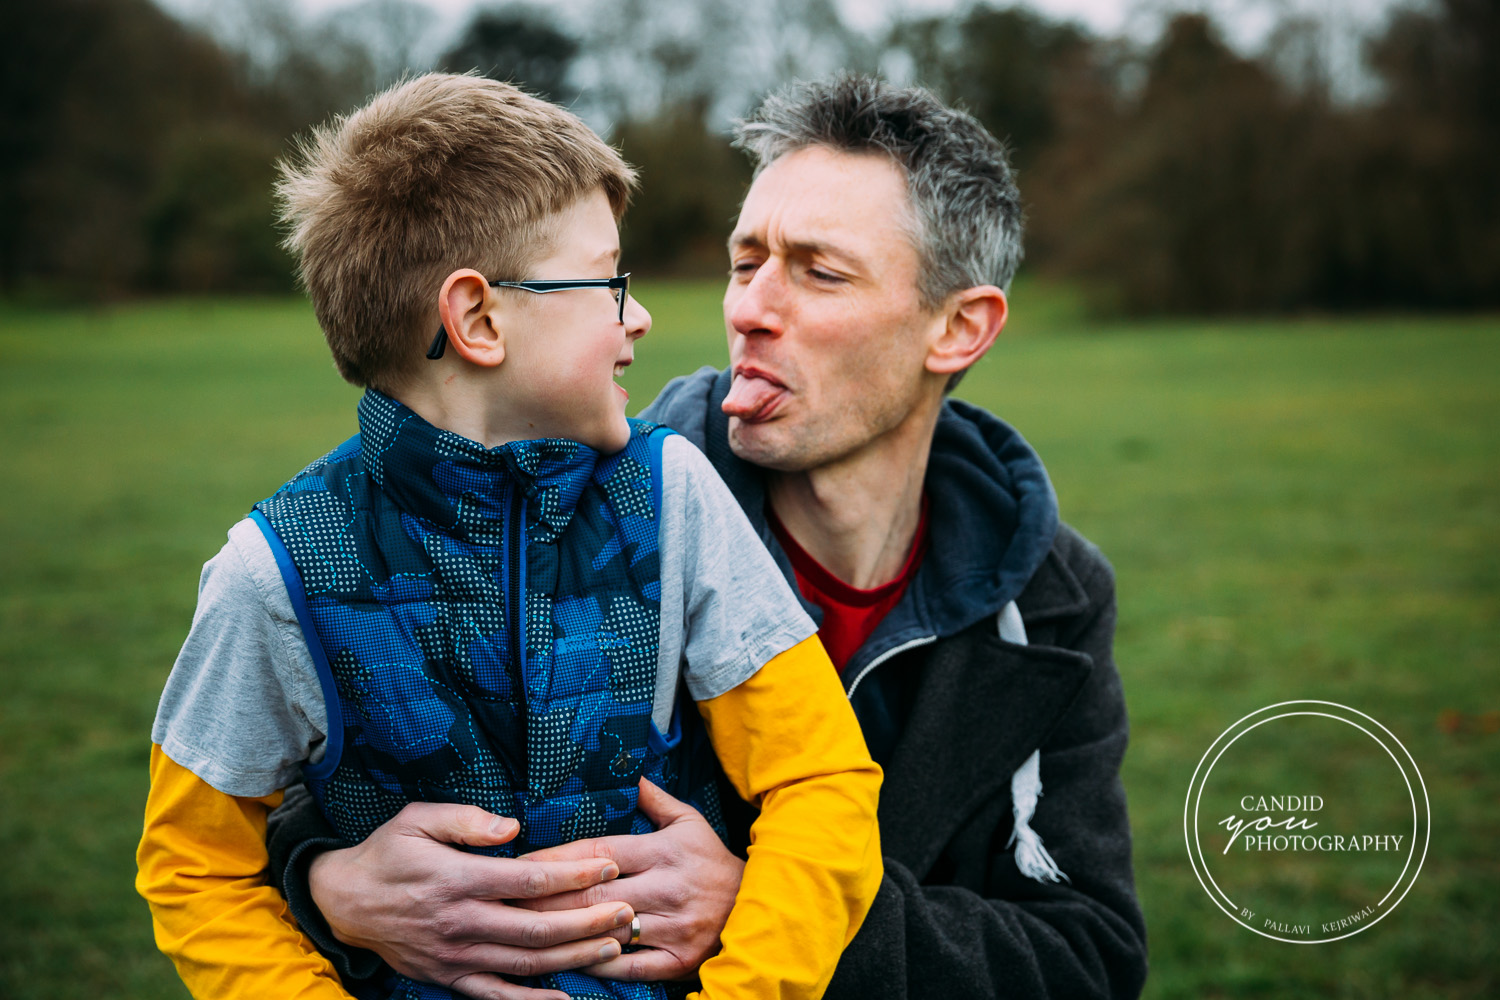 Harborne Dad yanks out tongue at son being cheeky